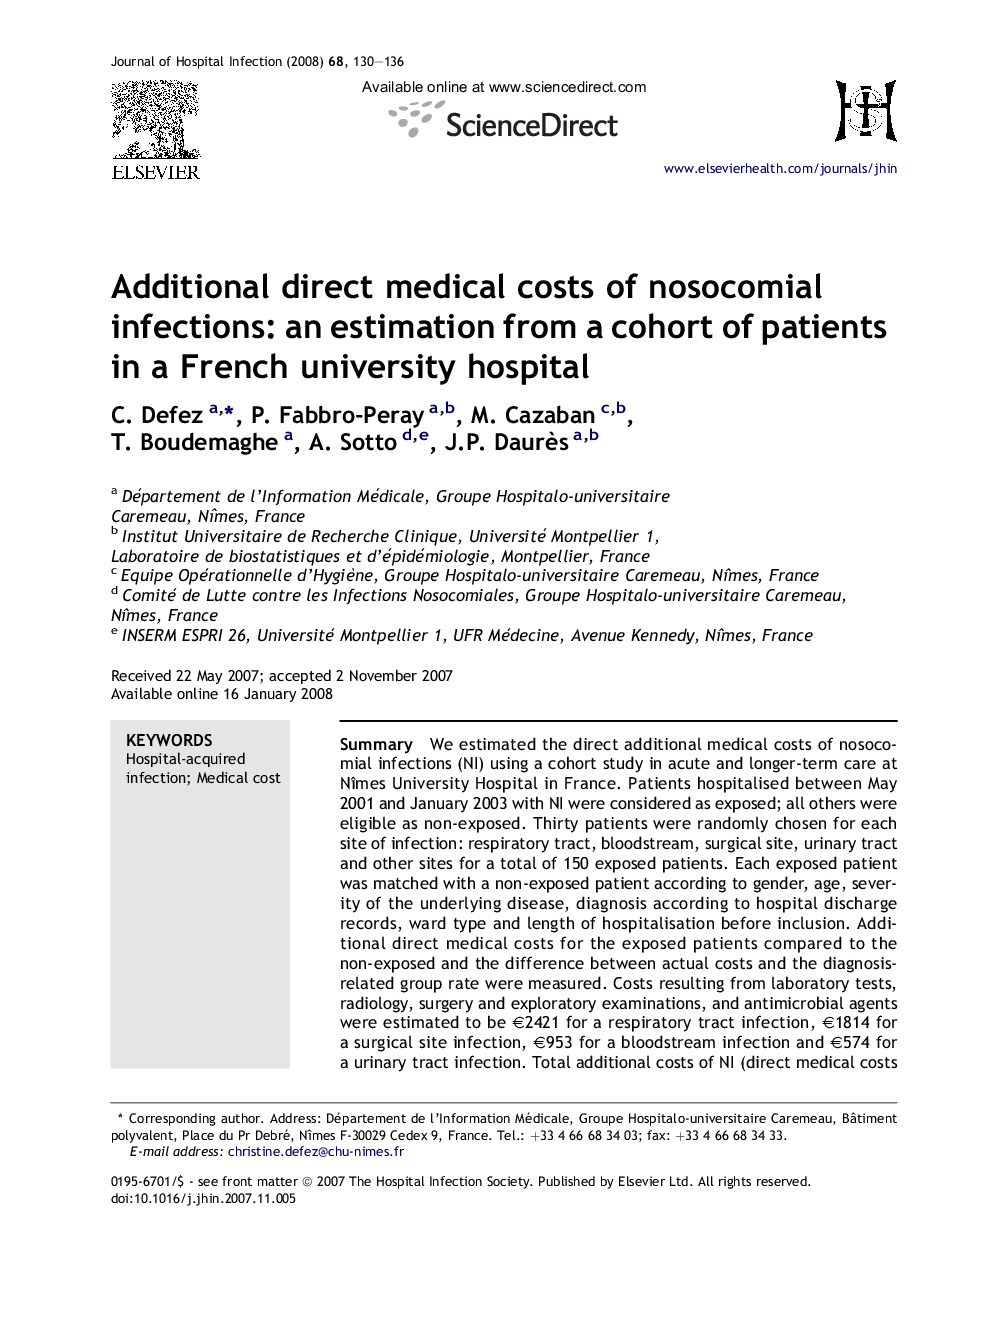 Additional direct medical costs of nosocomial infections: an estimation from a cohort of patients in a French university hospital